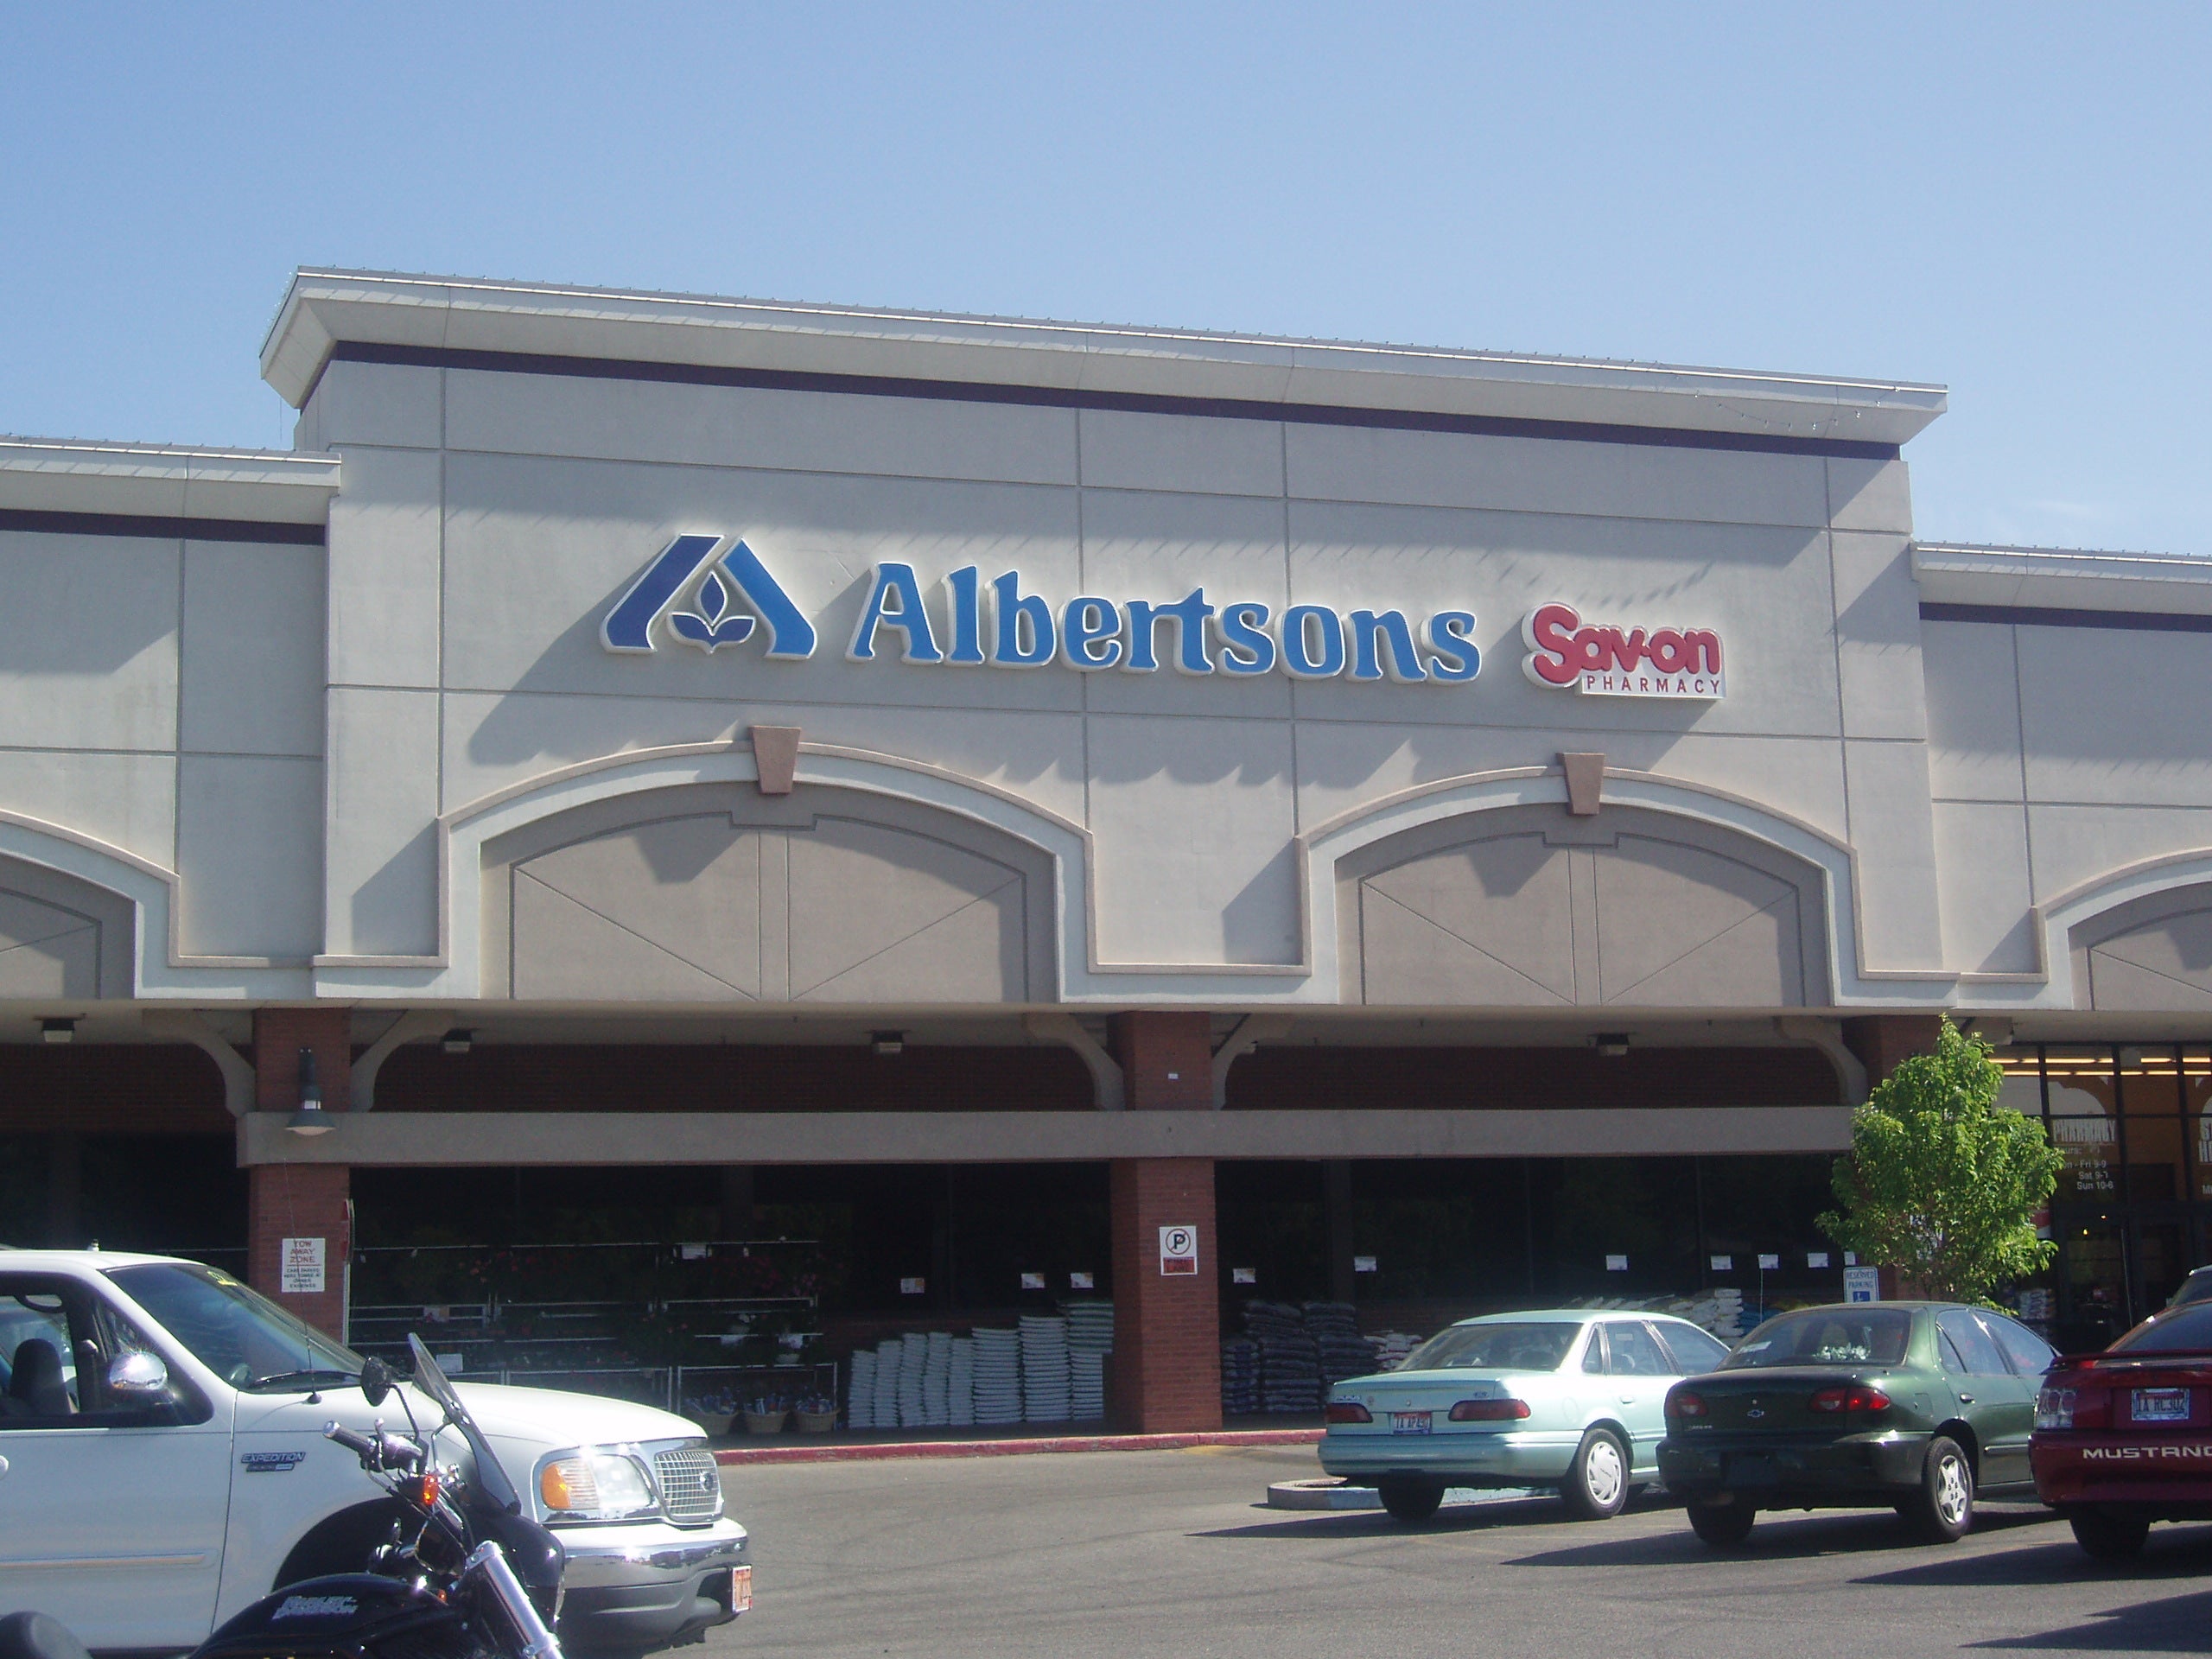 Grocery Retailer Albertsons Plans To Raise $1.3B In IPO